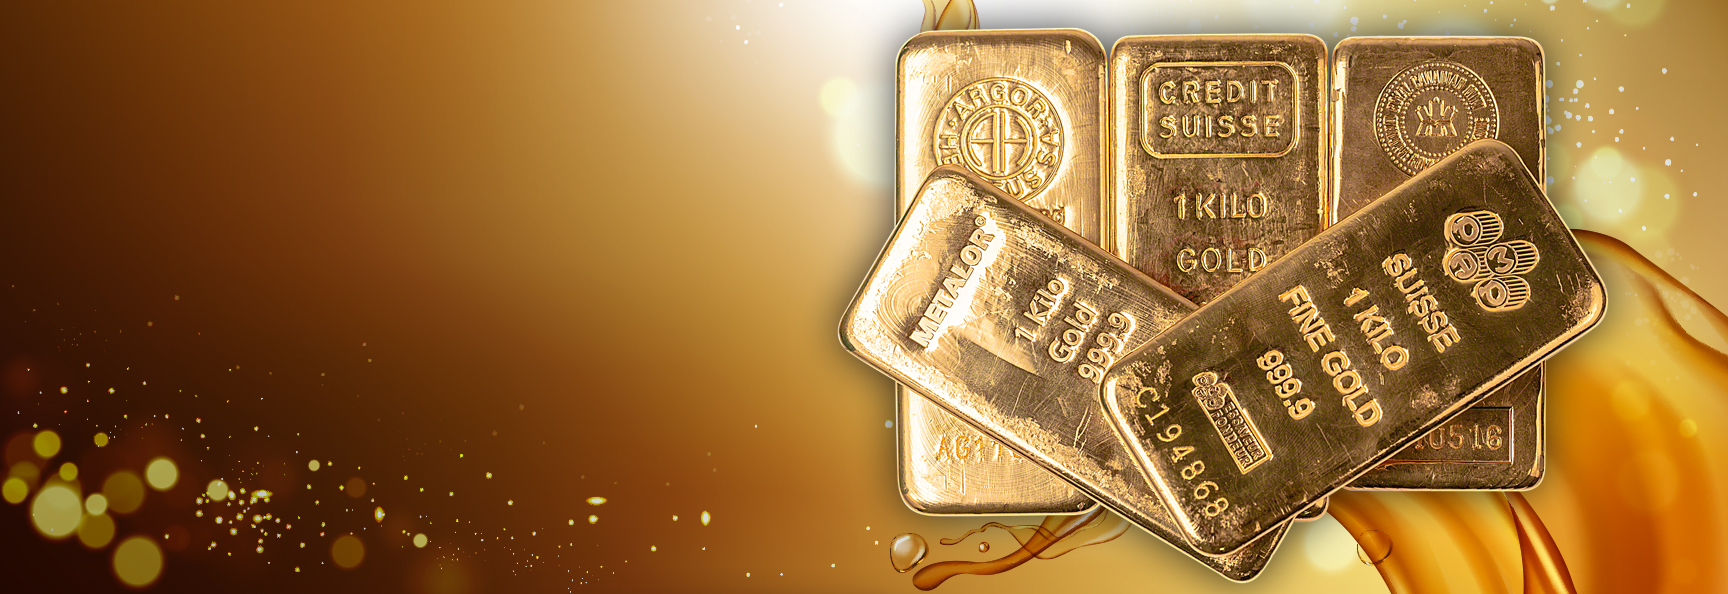 1 kg Gold Bars for the Spot Price of Gold!